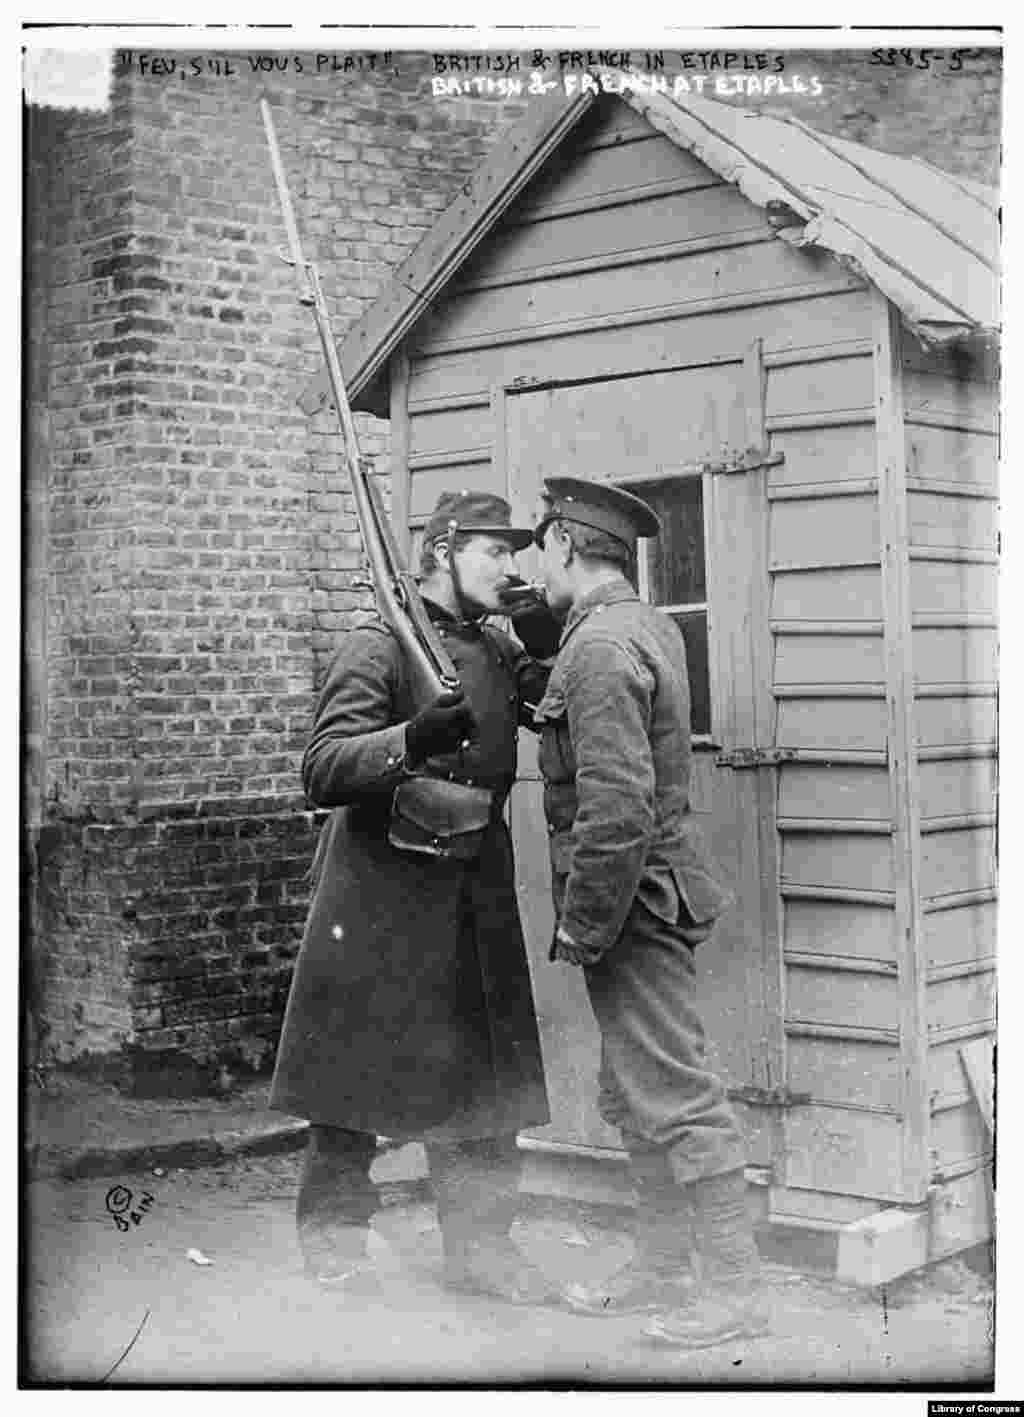 British and French soldiers light a cigarette at Etaples in northern France at the beginning of World War I. Although the source of the flu strain that devastated the world from 1918-1920 is disputed, many believe the pandemic began in this French military camp.